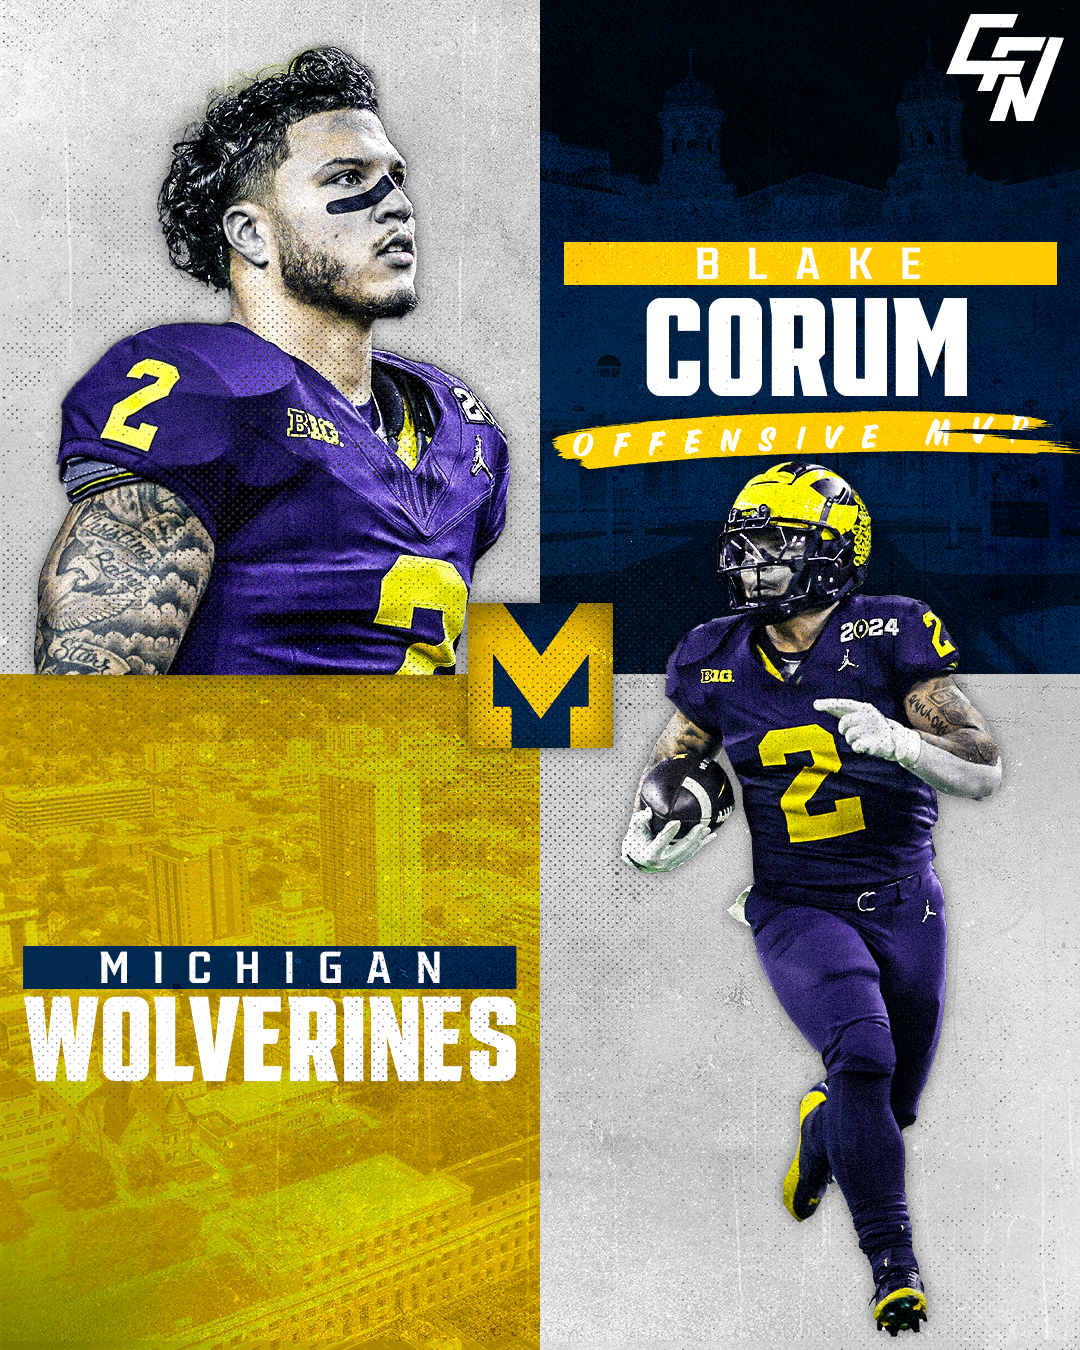 Blake Corum ran his way to history and Offensive MVP Honors in the College Football Playoff National Championship Game.